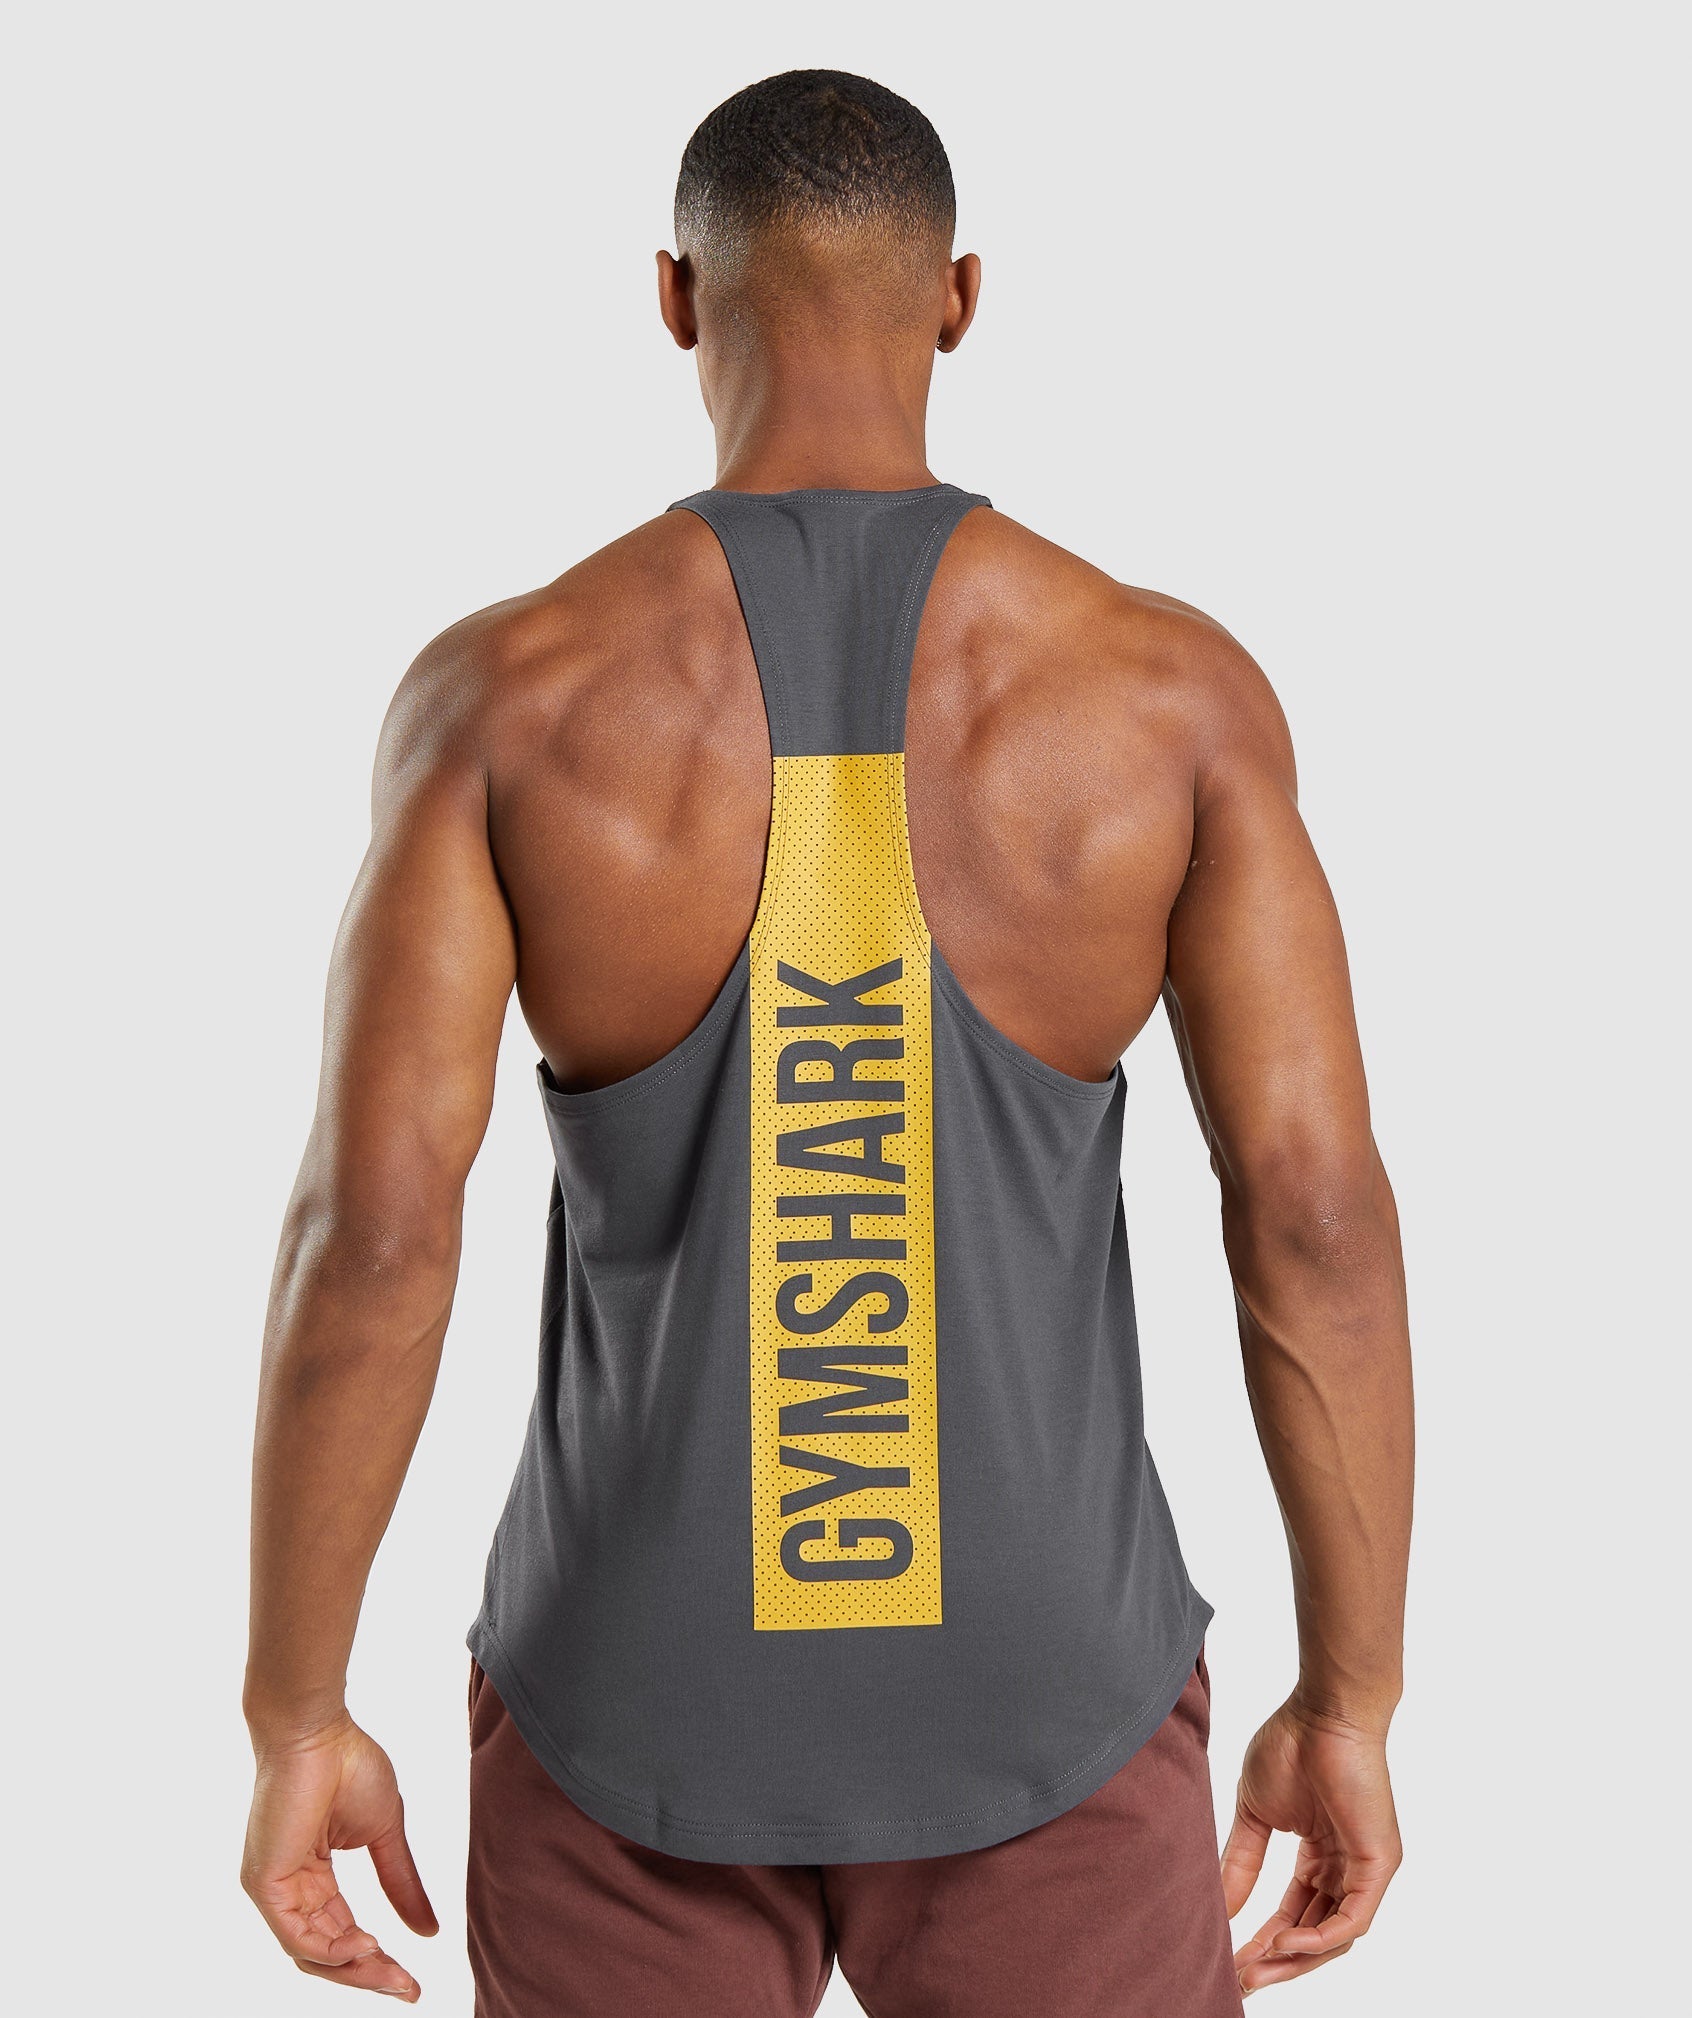 Sizing help for Bold Stinger Gymshark, 5'10, 181lbs 43-45 chest